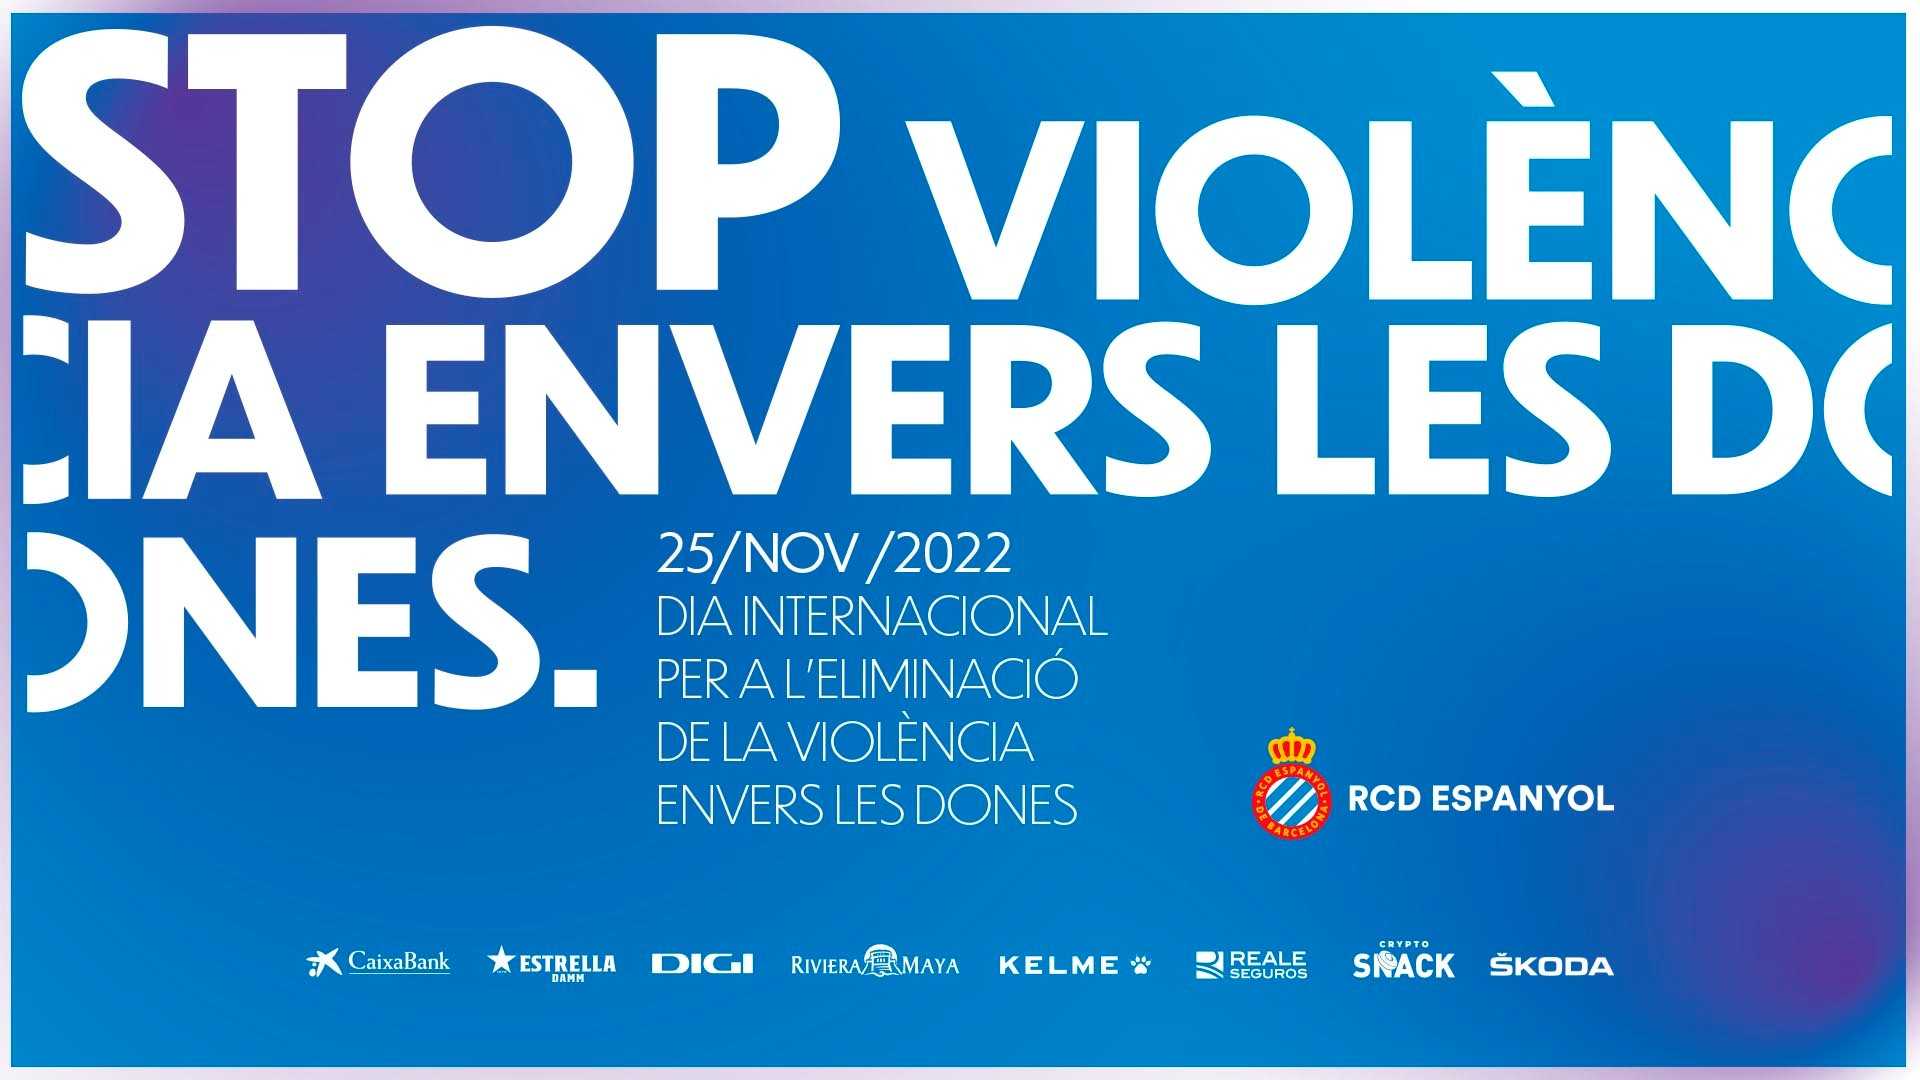 RCD Espanyol support campaign against gender violence